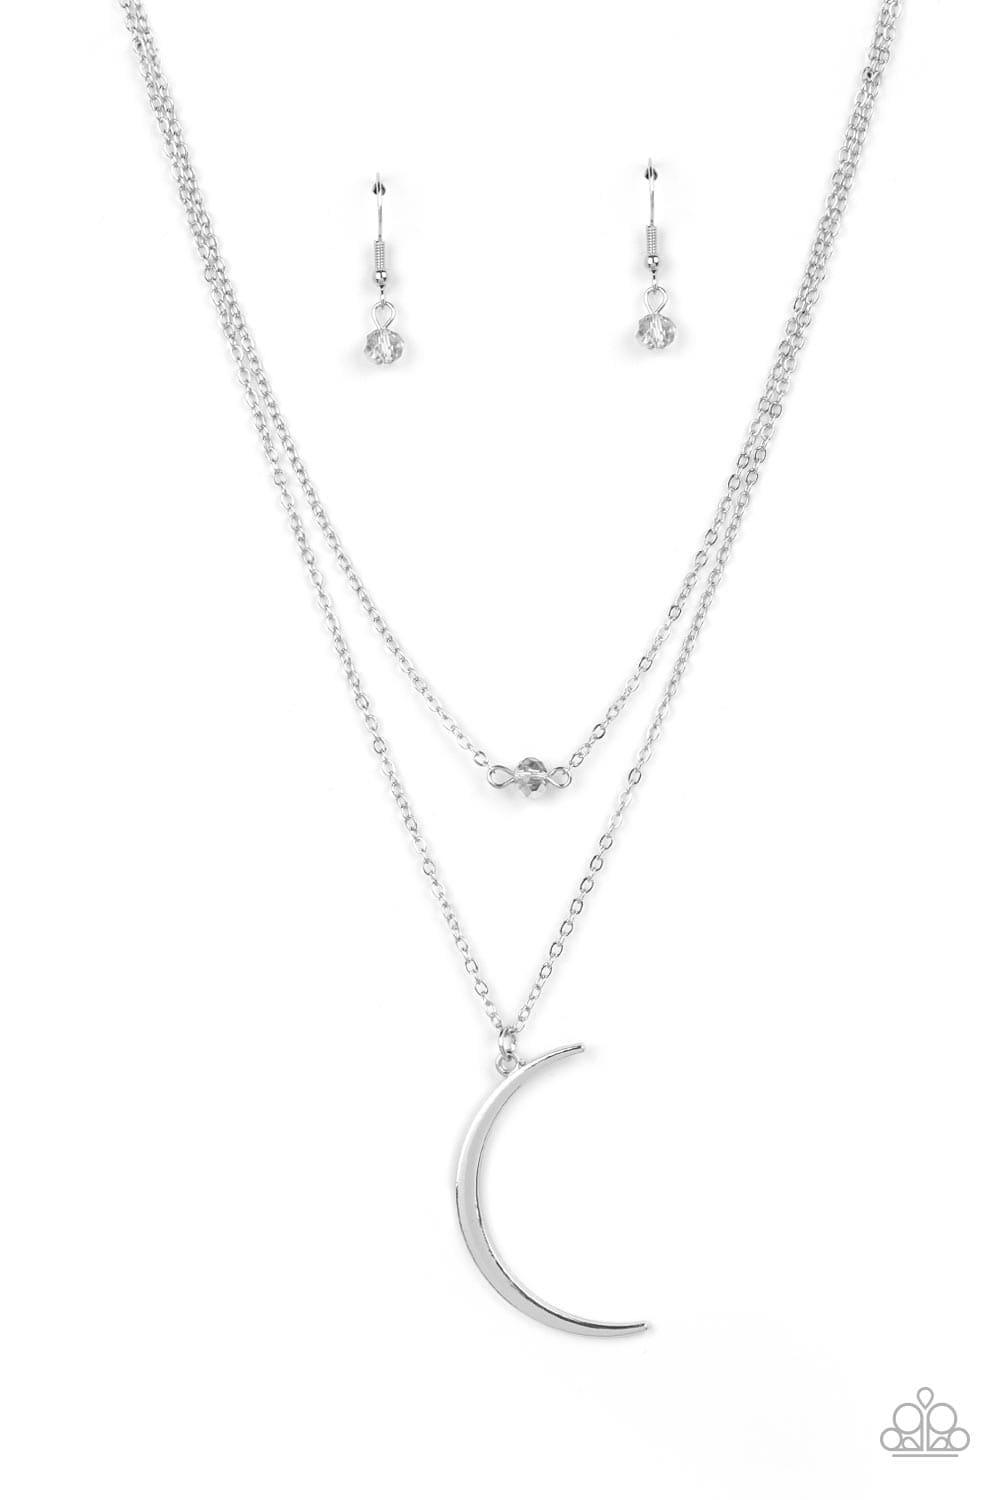 Paparazzi Accessories - Modern Moonbeam - Silver Necklace - Bling by JessieK